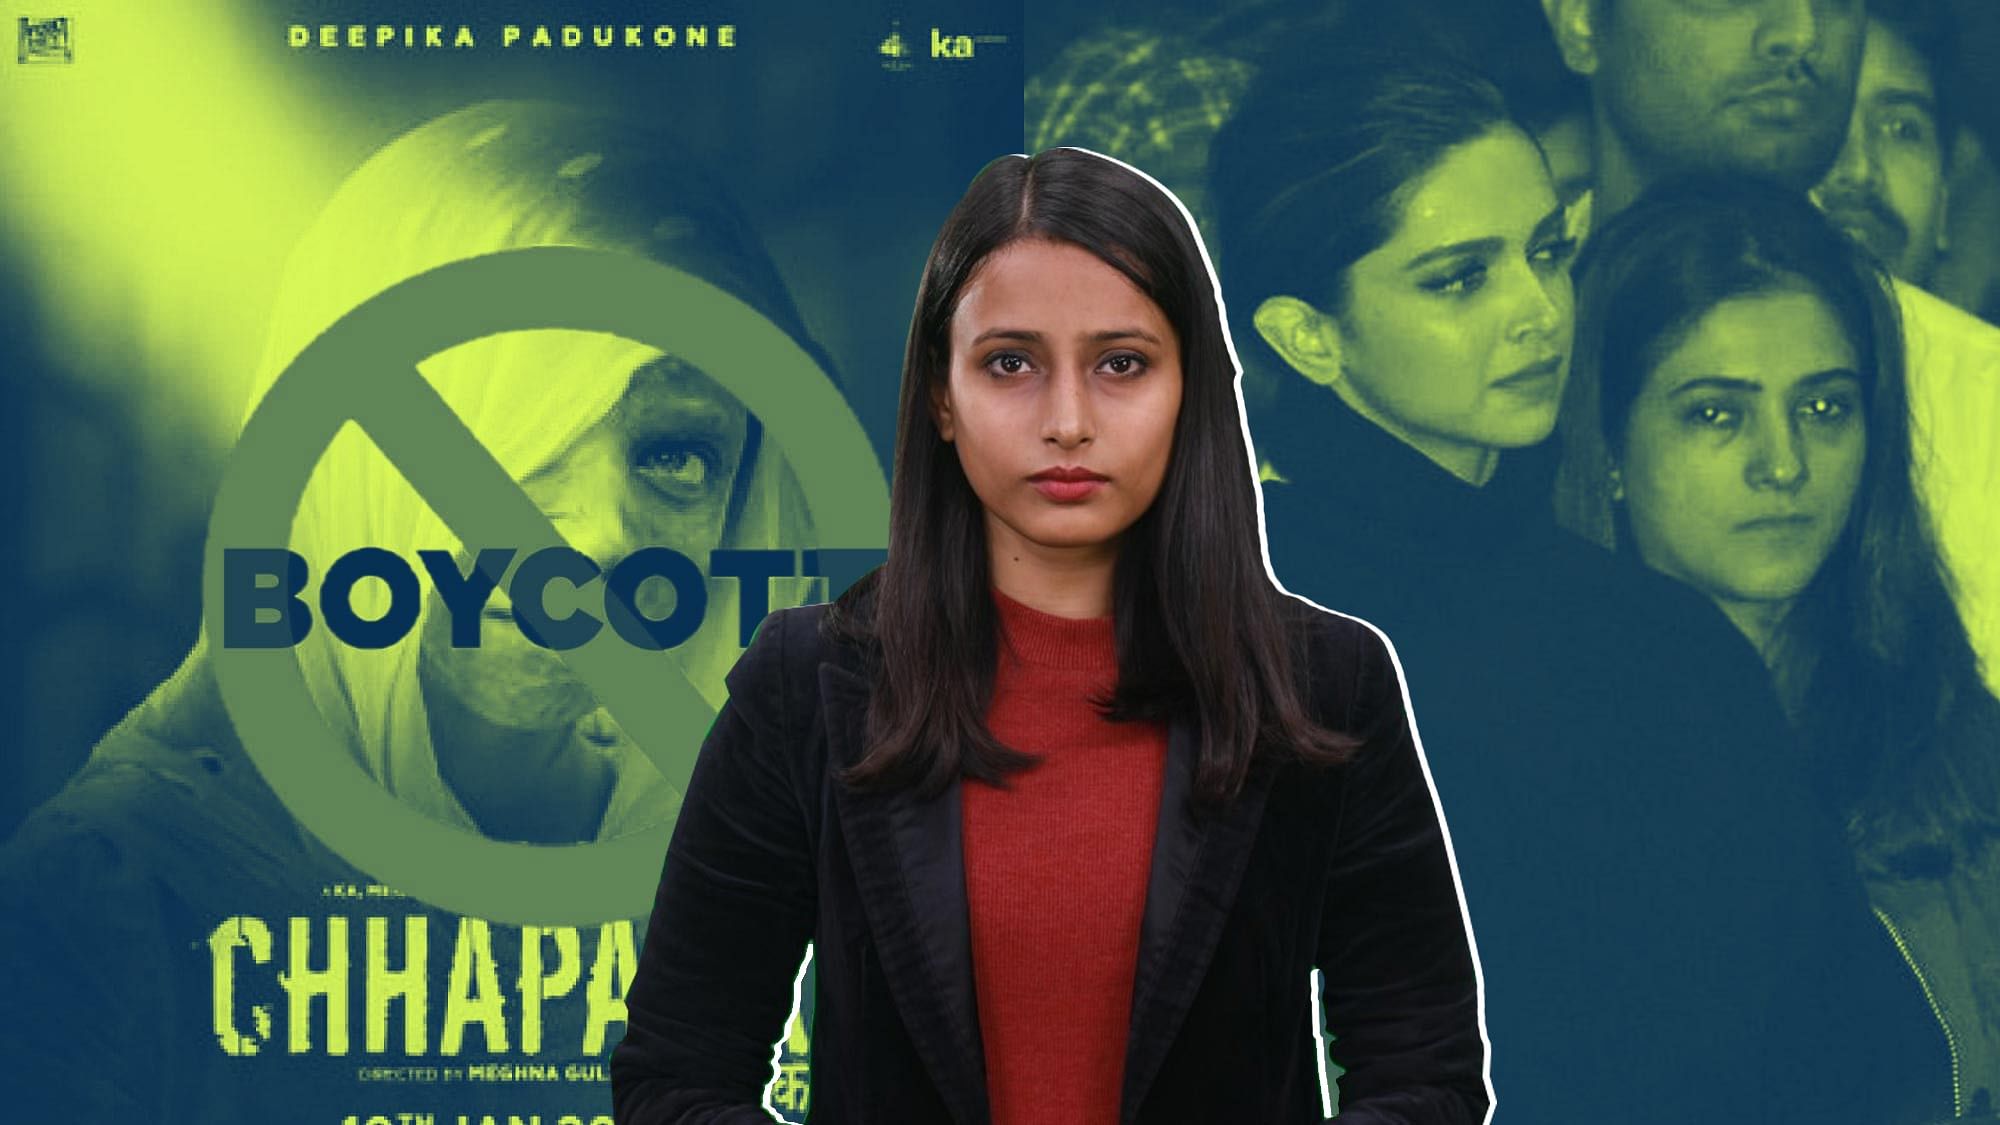 It’s easy to condemn Deepika’s JNU visit from behind your screens but one needs guts to take the step she did. Those boycotting ‘Chapaak’ need to consider they are standing against a film based on an acid-attack survivor. 